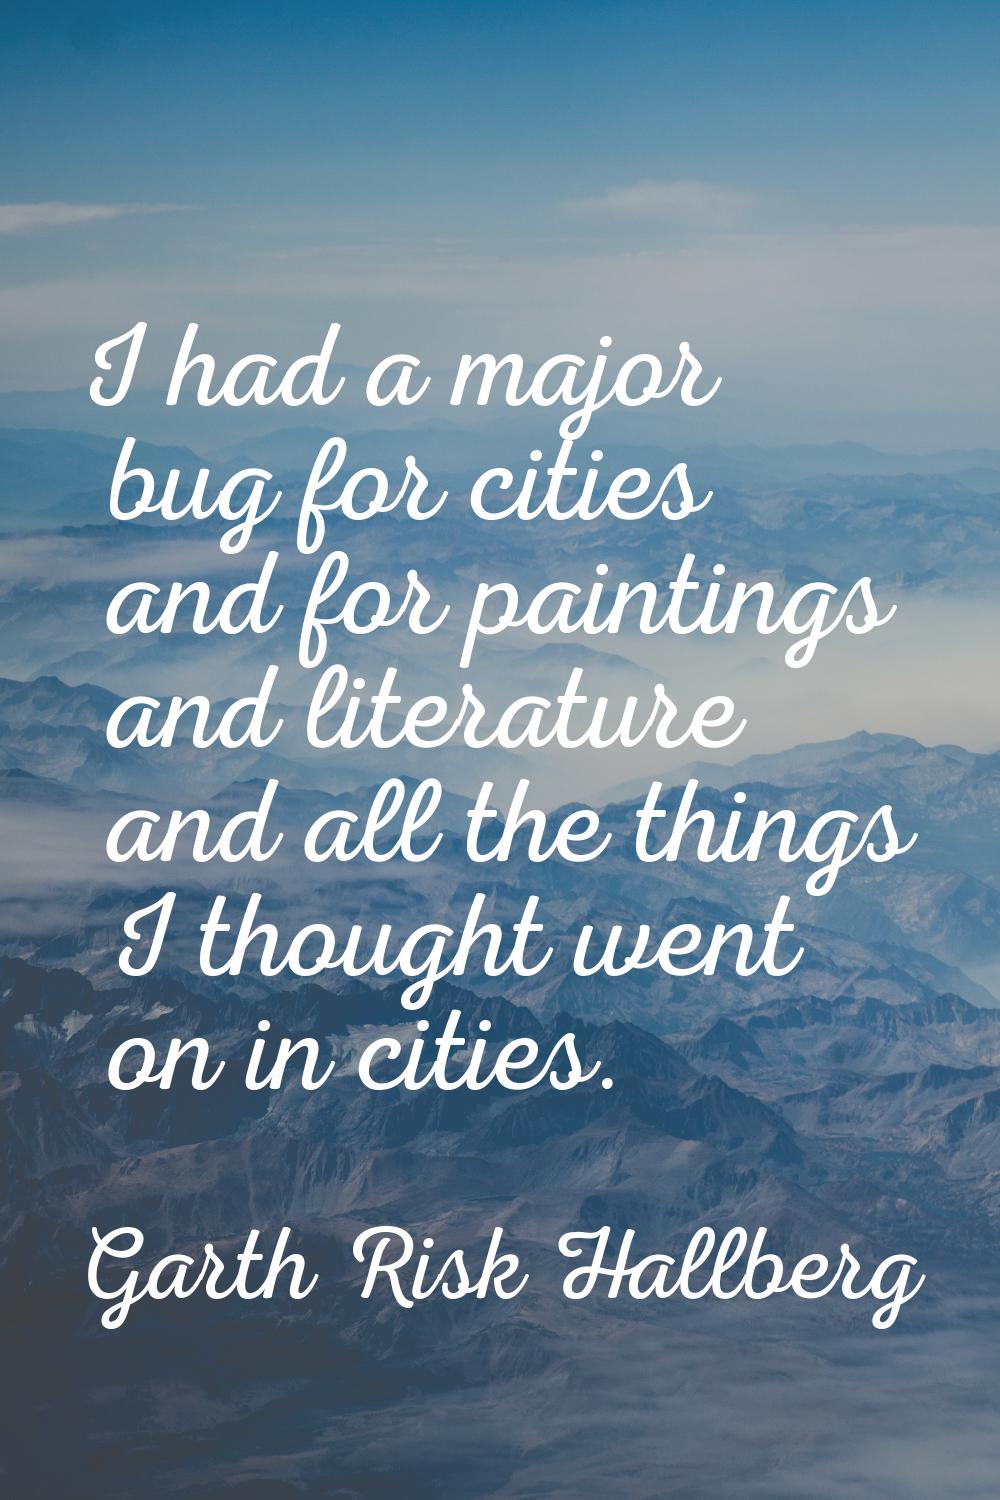 I had a major bug for cities and for paintings and literature and all the things I thought went on 